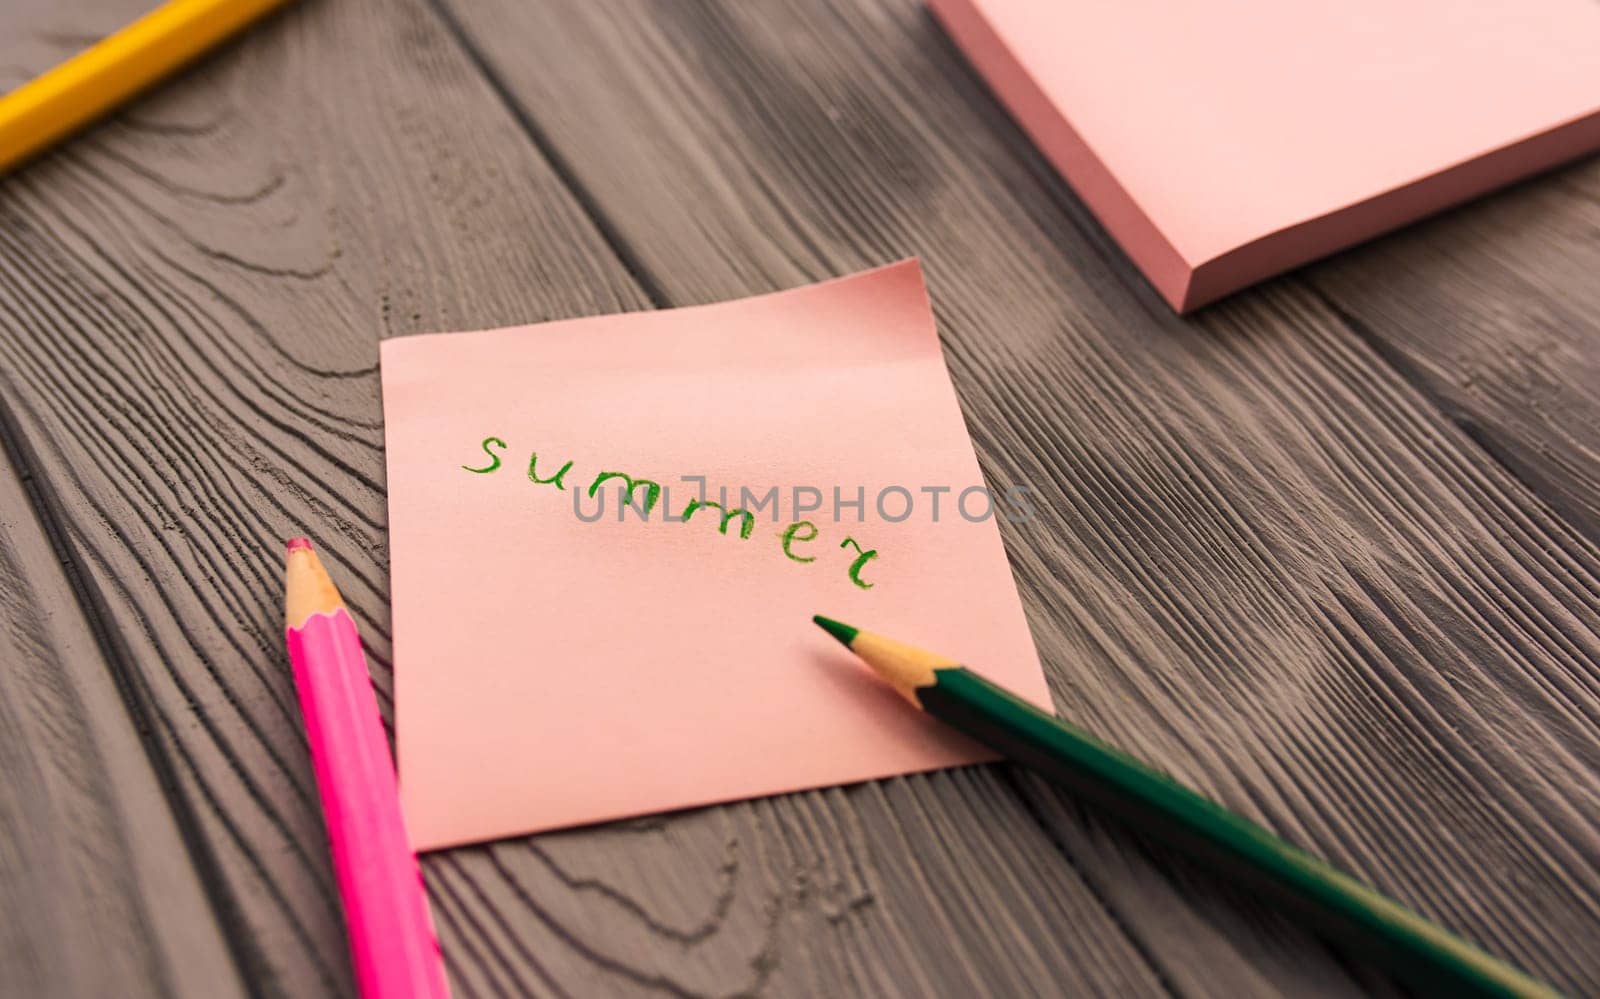 artist multicolored pencils sketch paper card inscription summer. Yellow red blue pencils. Summer background template mockup space blank colorful composition text. Top view above wooden background